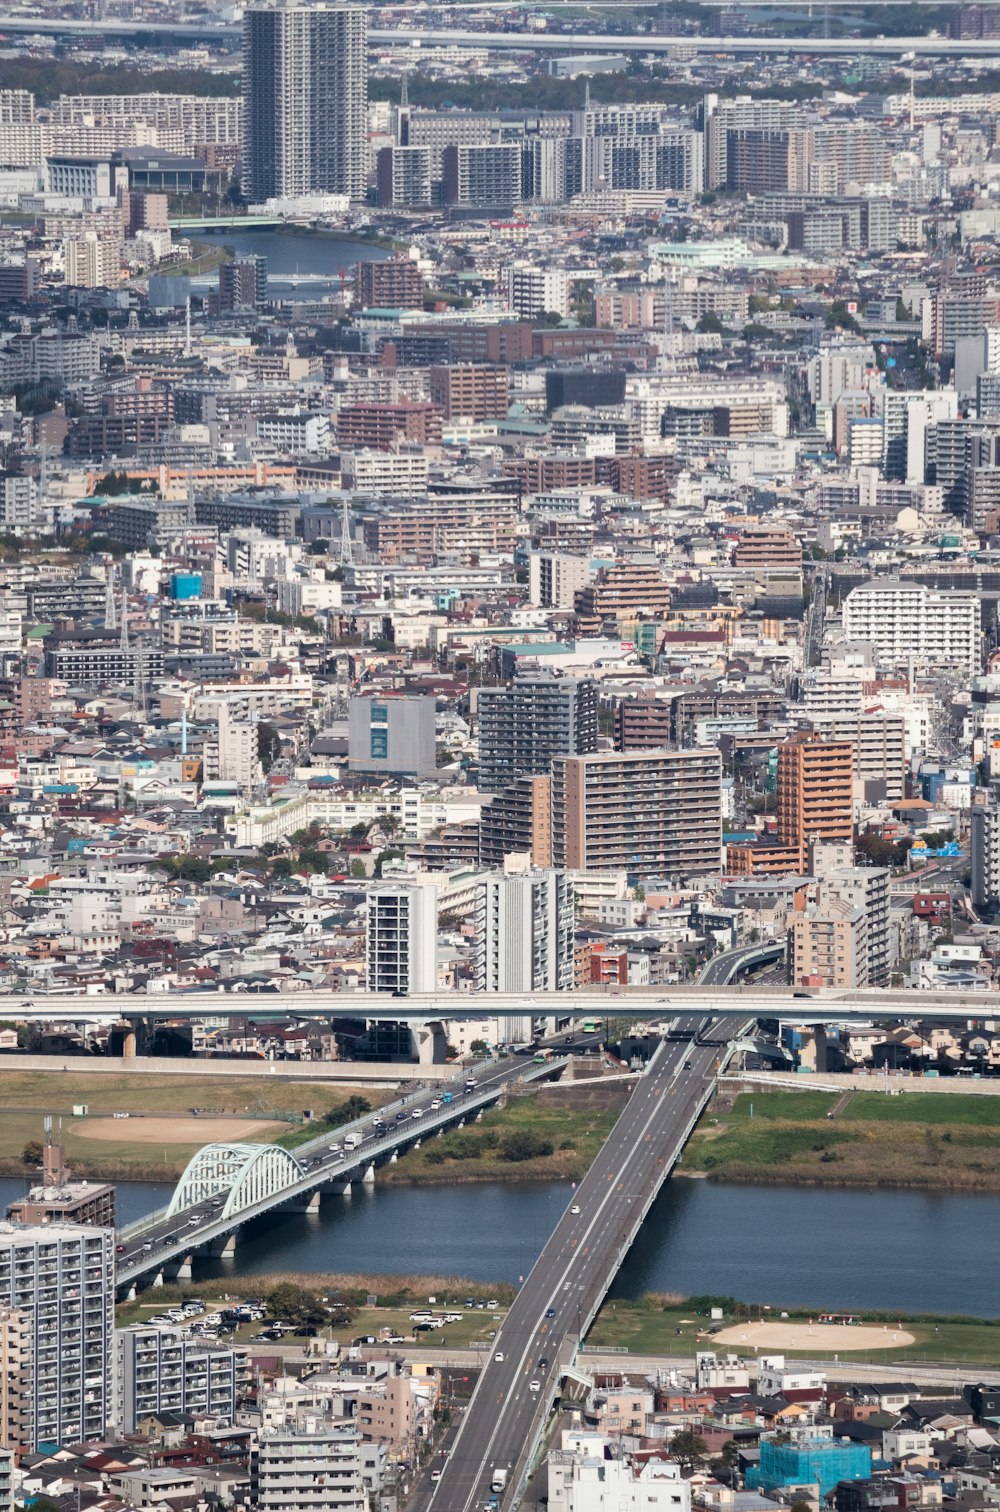 an aerial view of a city with a bridge in the foreground